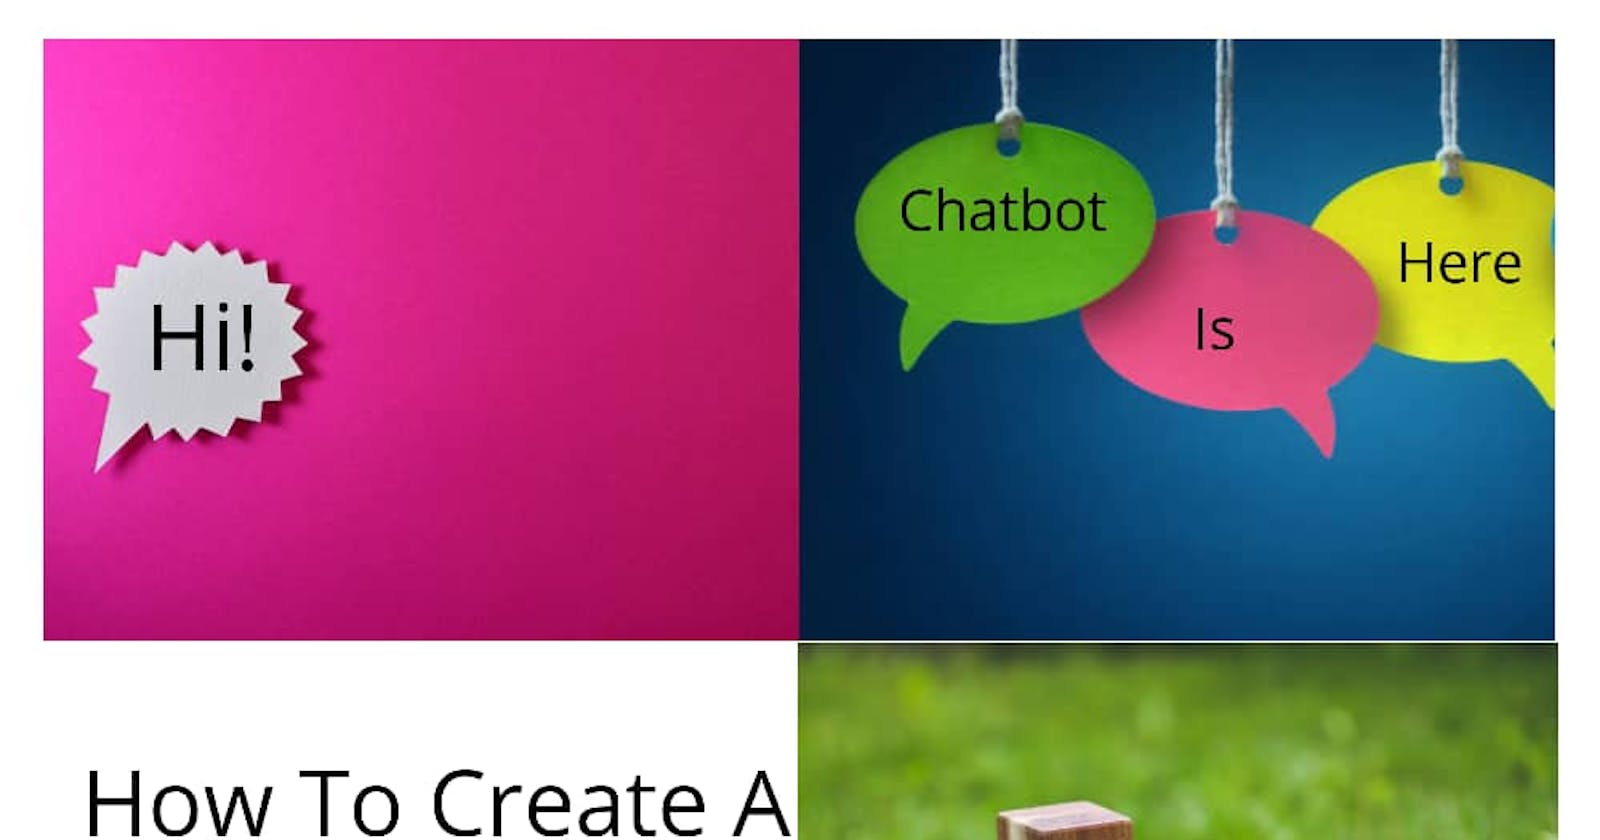 How to create a chatbot using python